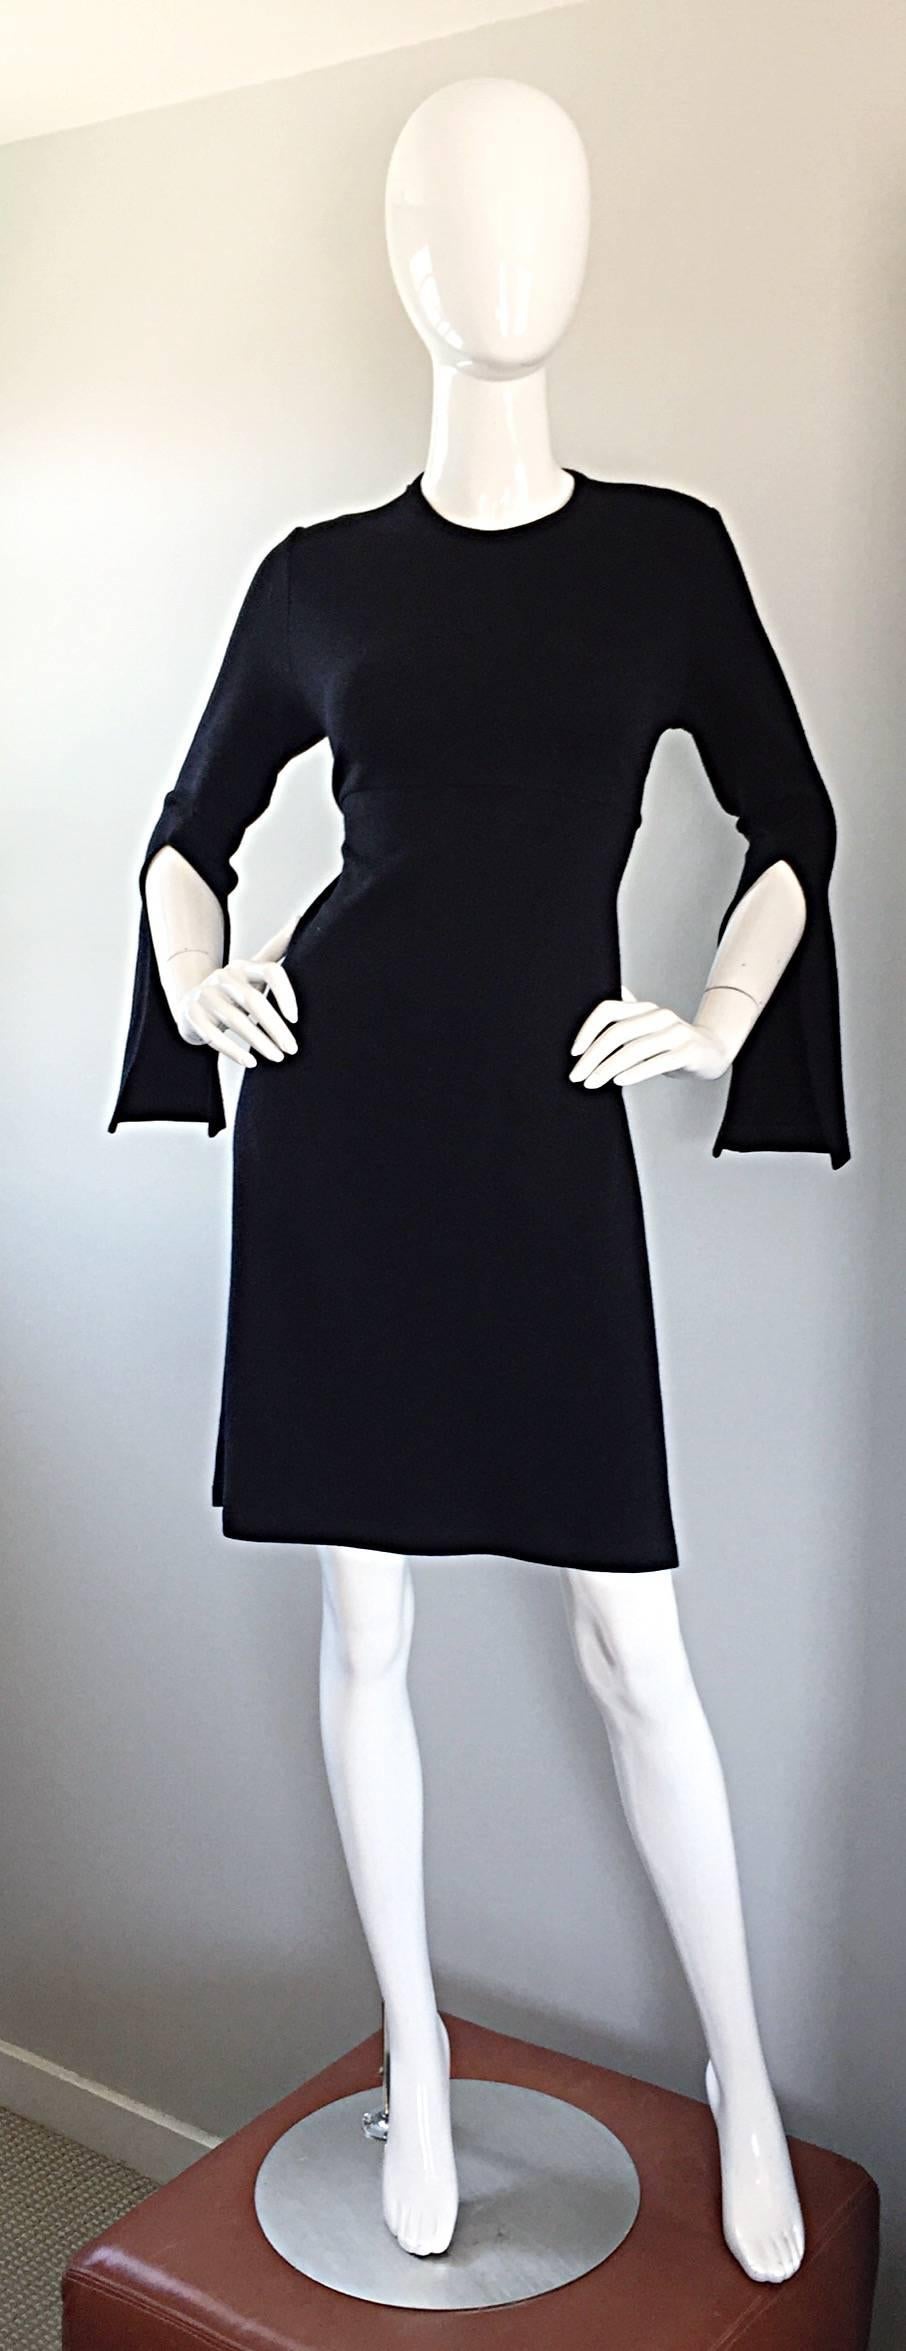 The perfect little black dress by MORGANE LE FAY, but with an awesome twist! Features 'slashed' sleeves for a slight Avant Garde look! Expertly constructed with a heavy eye to detail and construction. Wonderful tailored fit with an attached tie belt